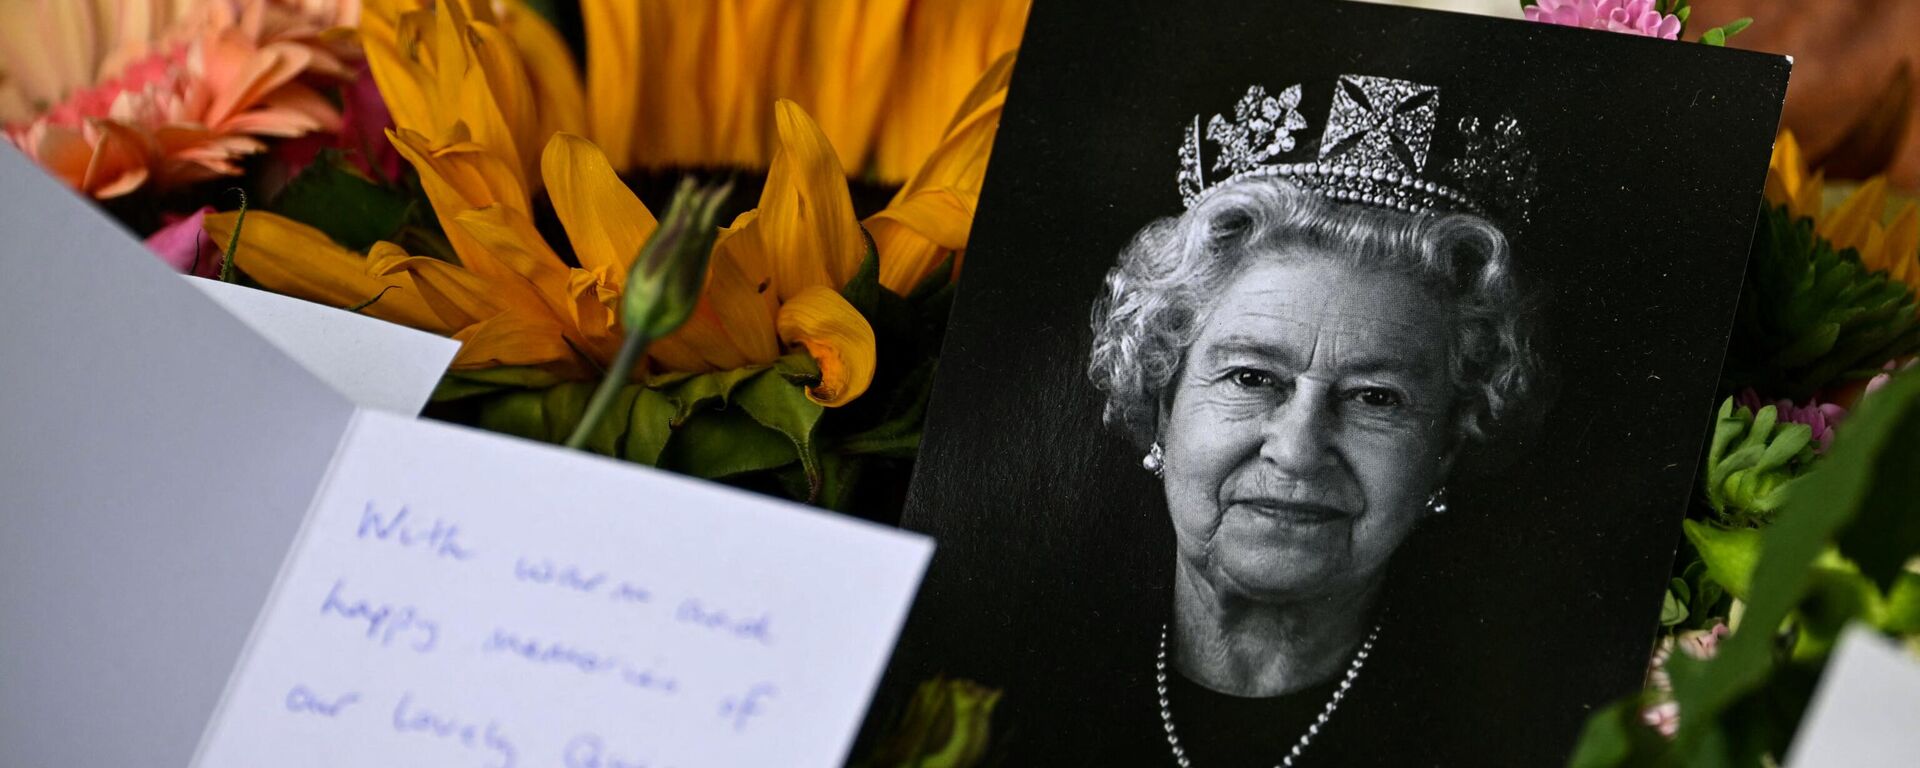 A portrait of late Queen Elizabeth II is pictured among flowers and tributes left in Green Park in London on September 18, 2022, following her death on September 8 - Sputnik International, 1920, 18.09.2022